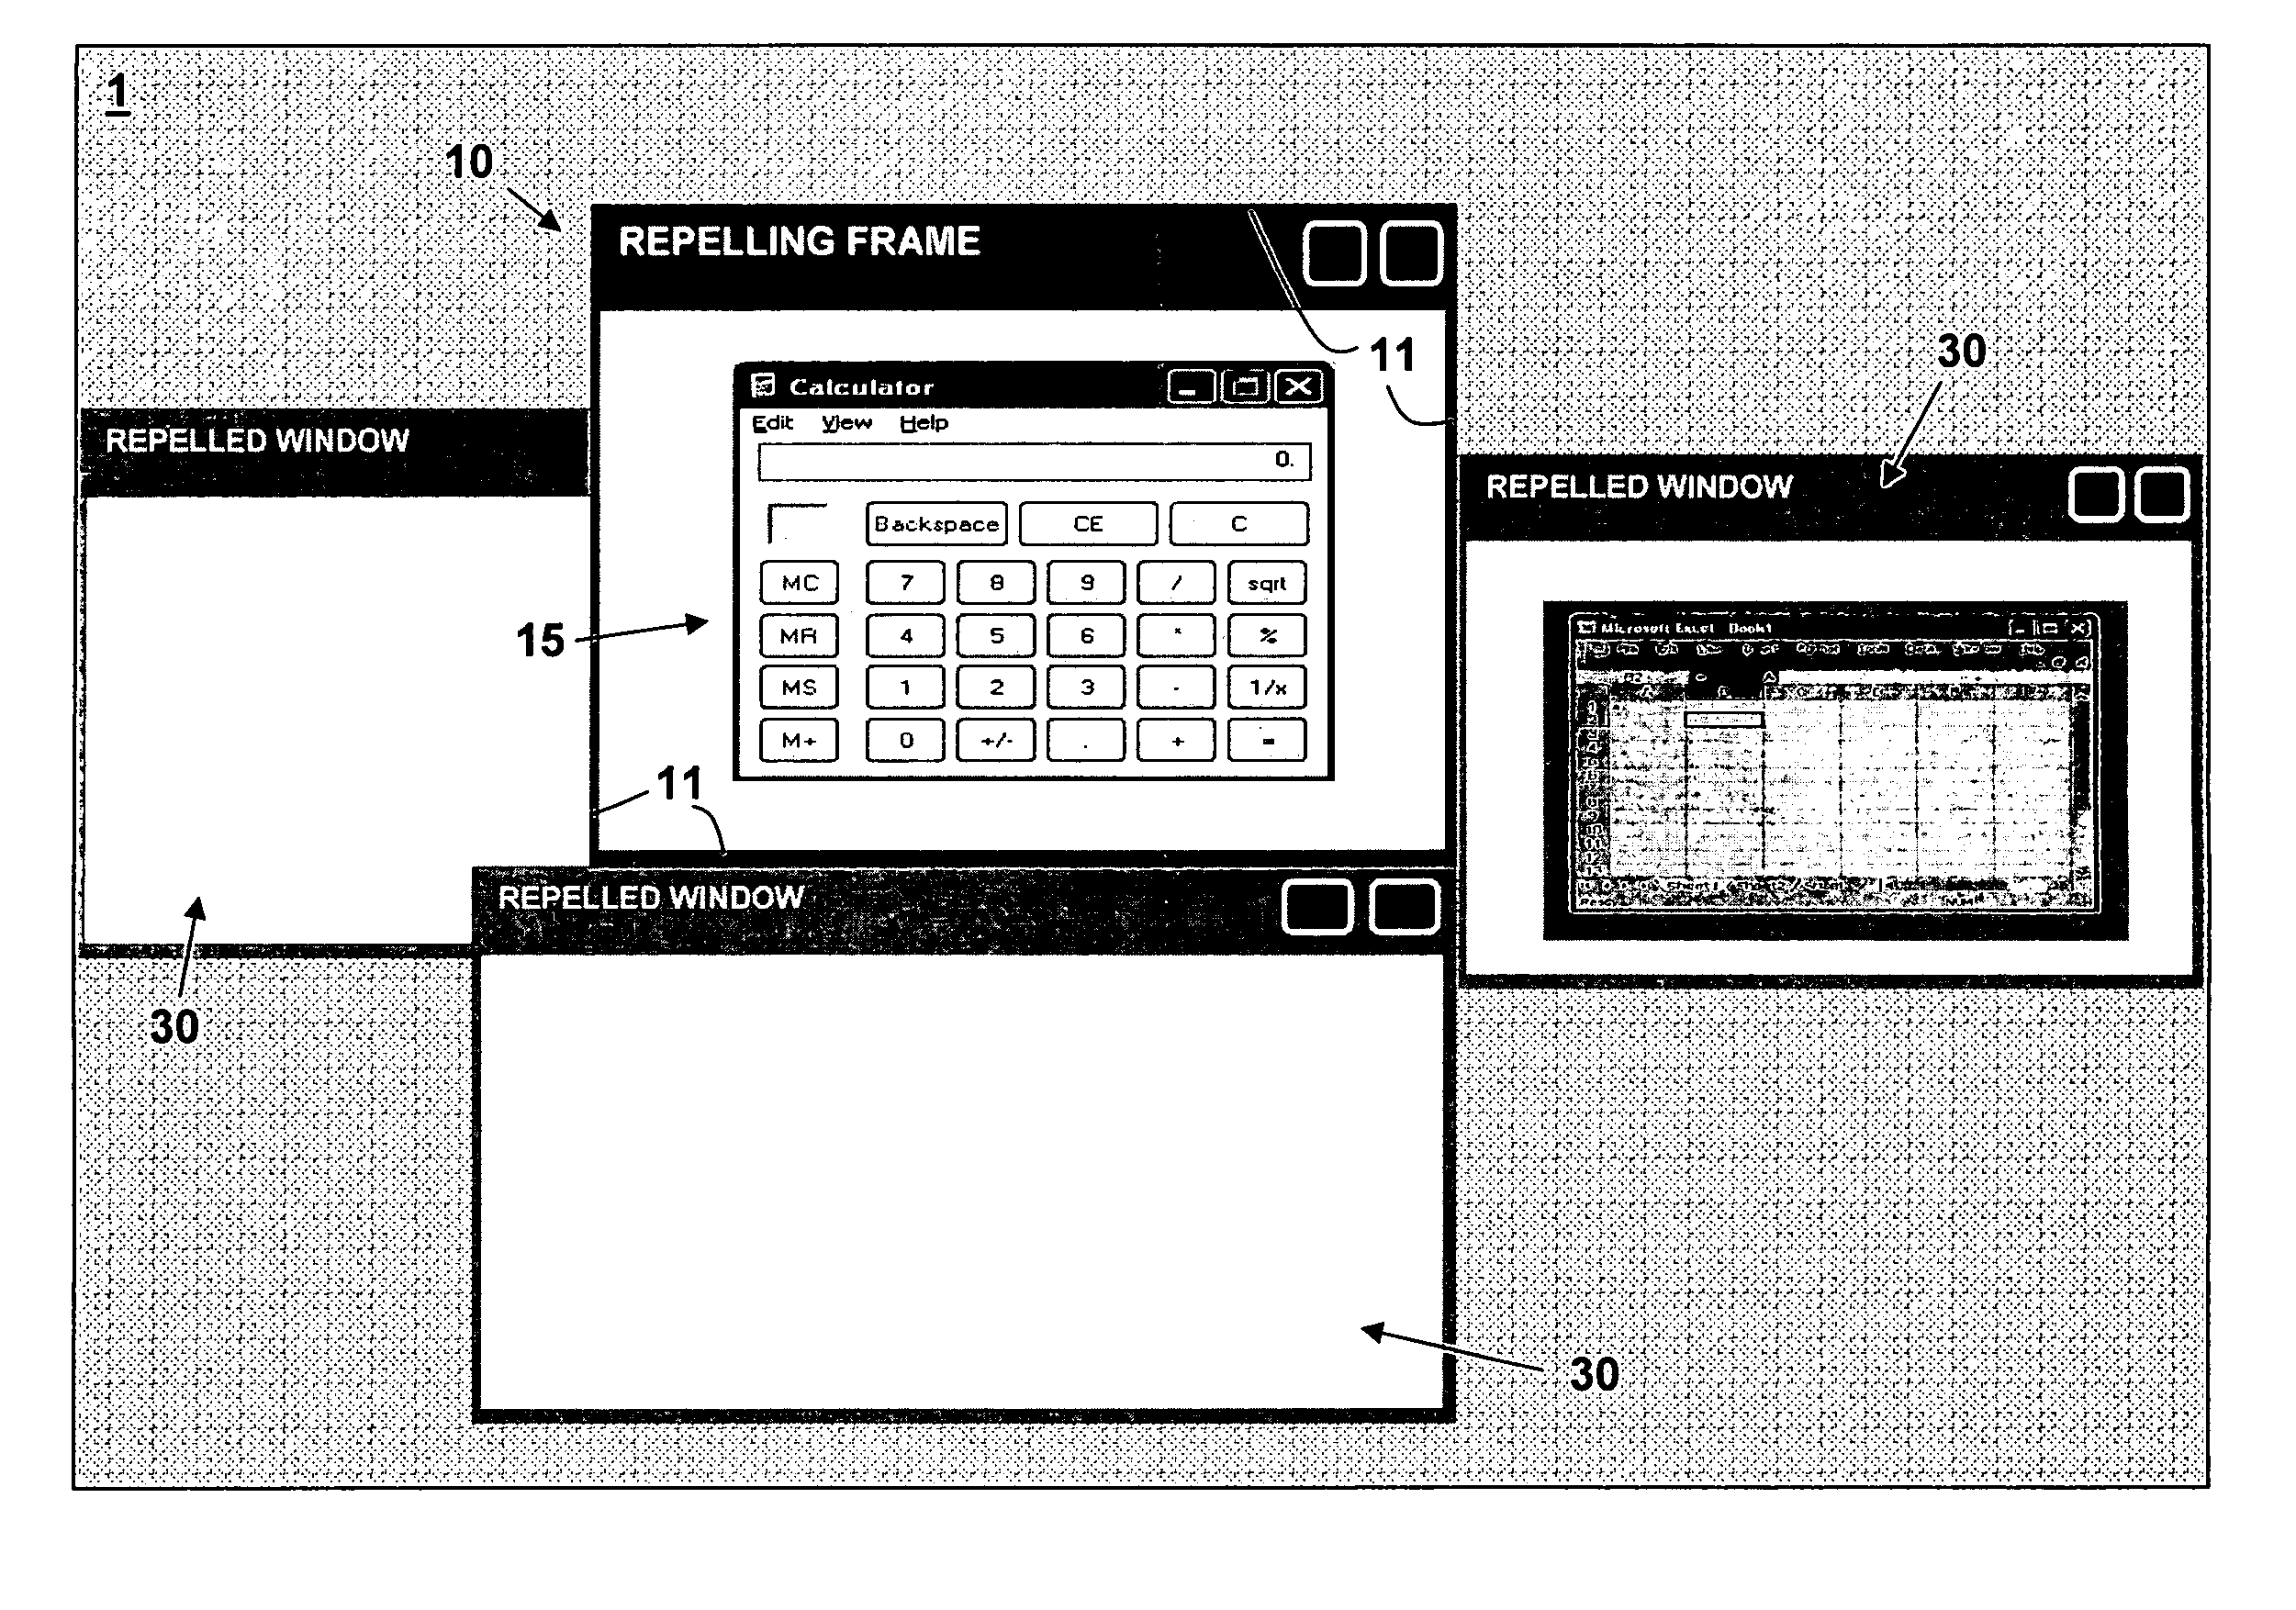 Pop-up repelling frame for use in screen sharing